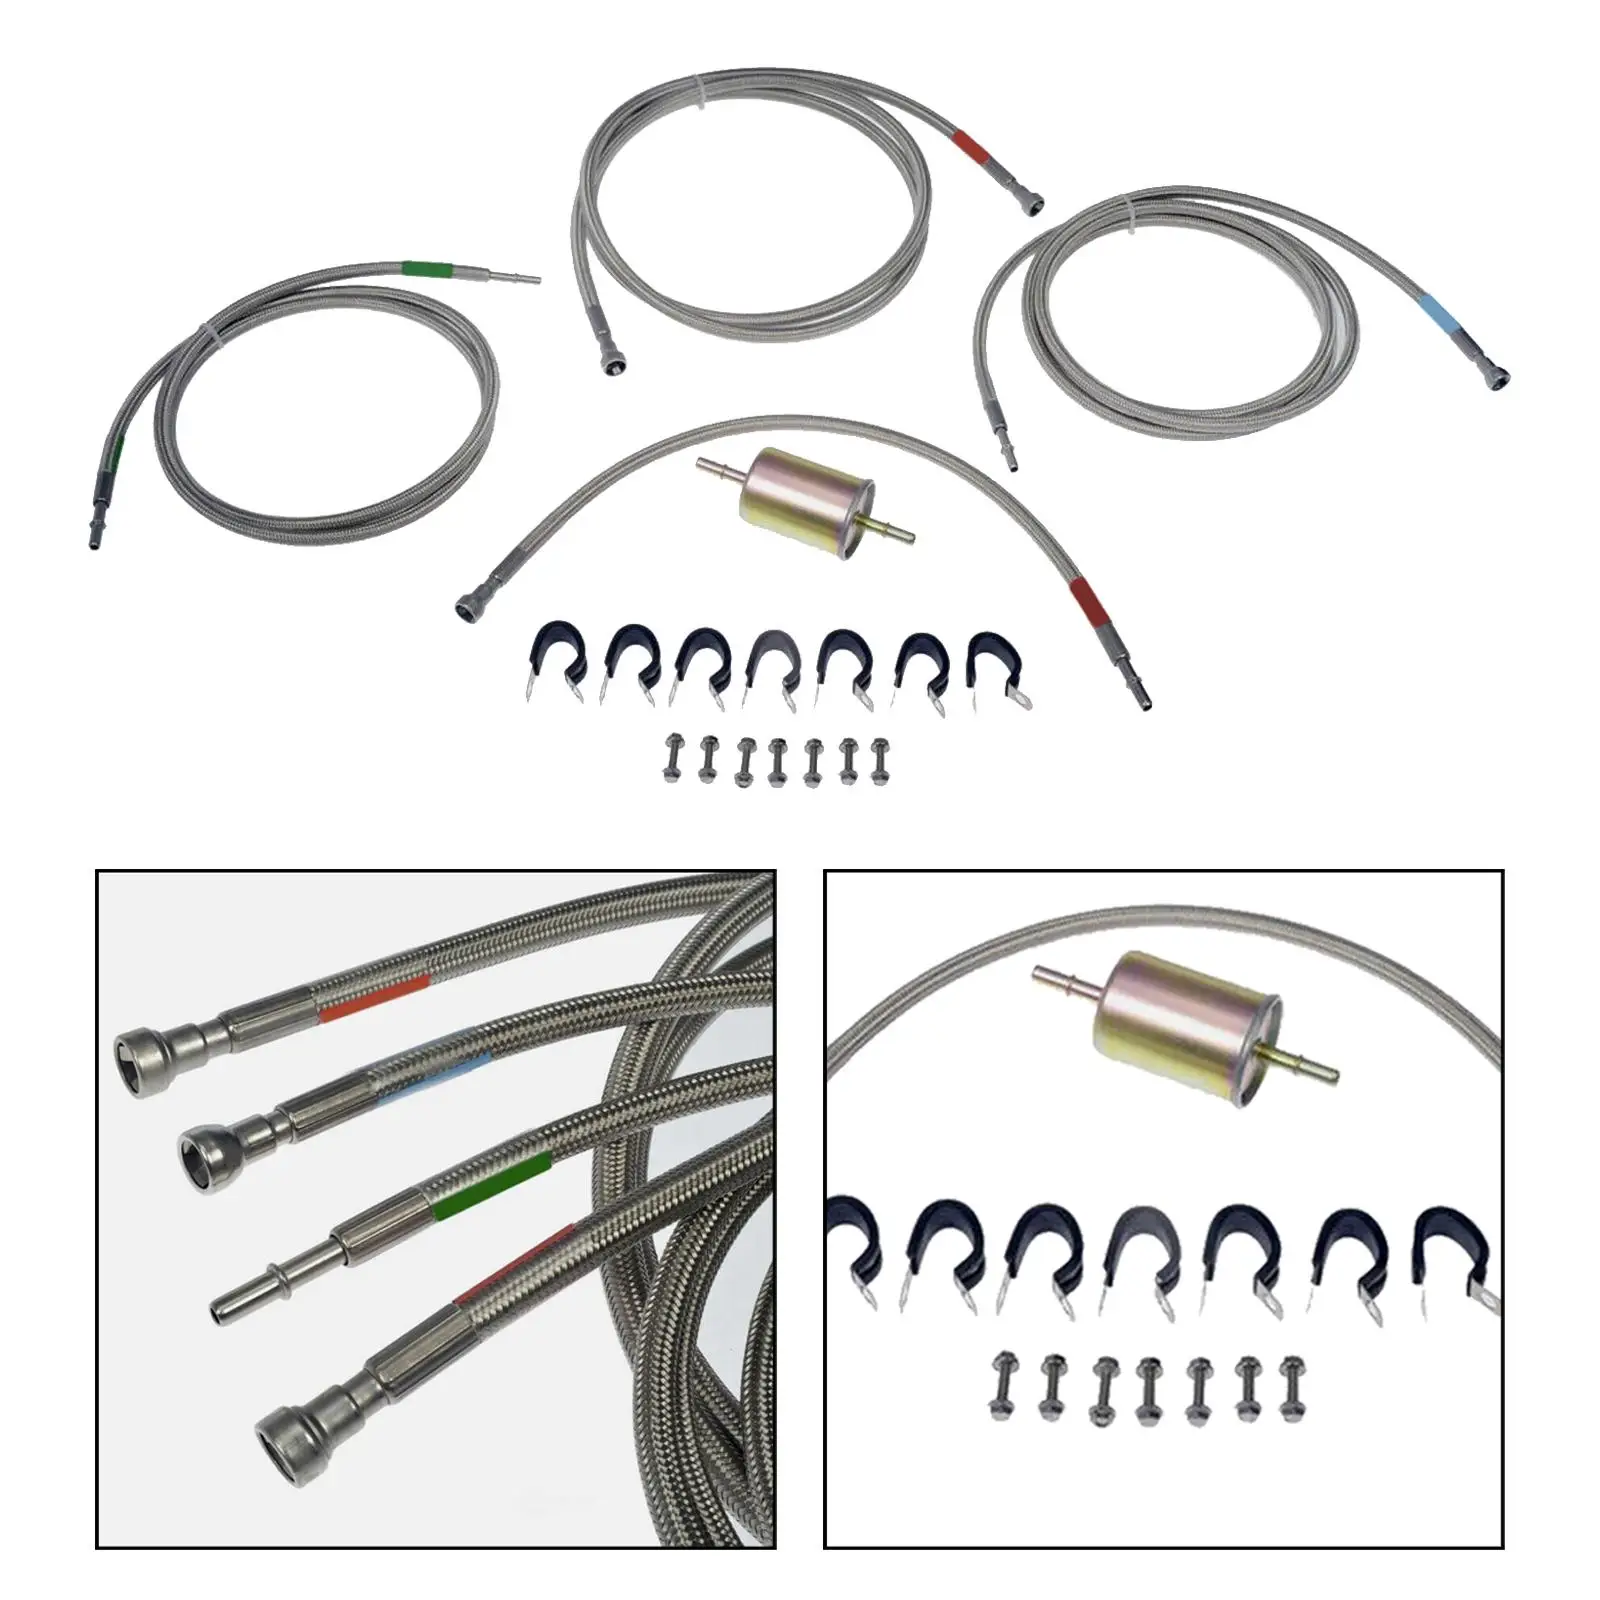 Fuel Line Assy 819-840 Steel Braided Fuel Lines Set Repair Parts Assembly Direct Replaces for Chevrolet Silverado 1500 2500